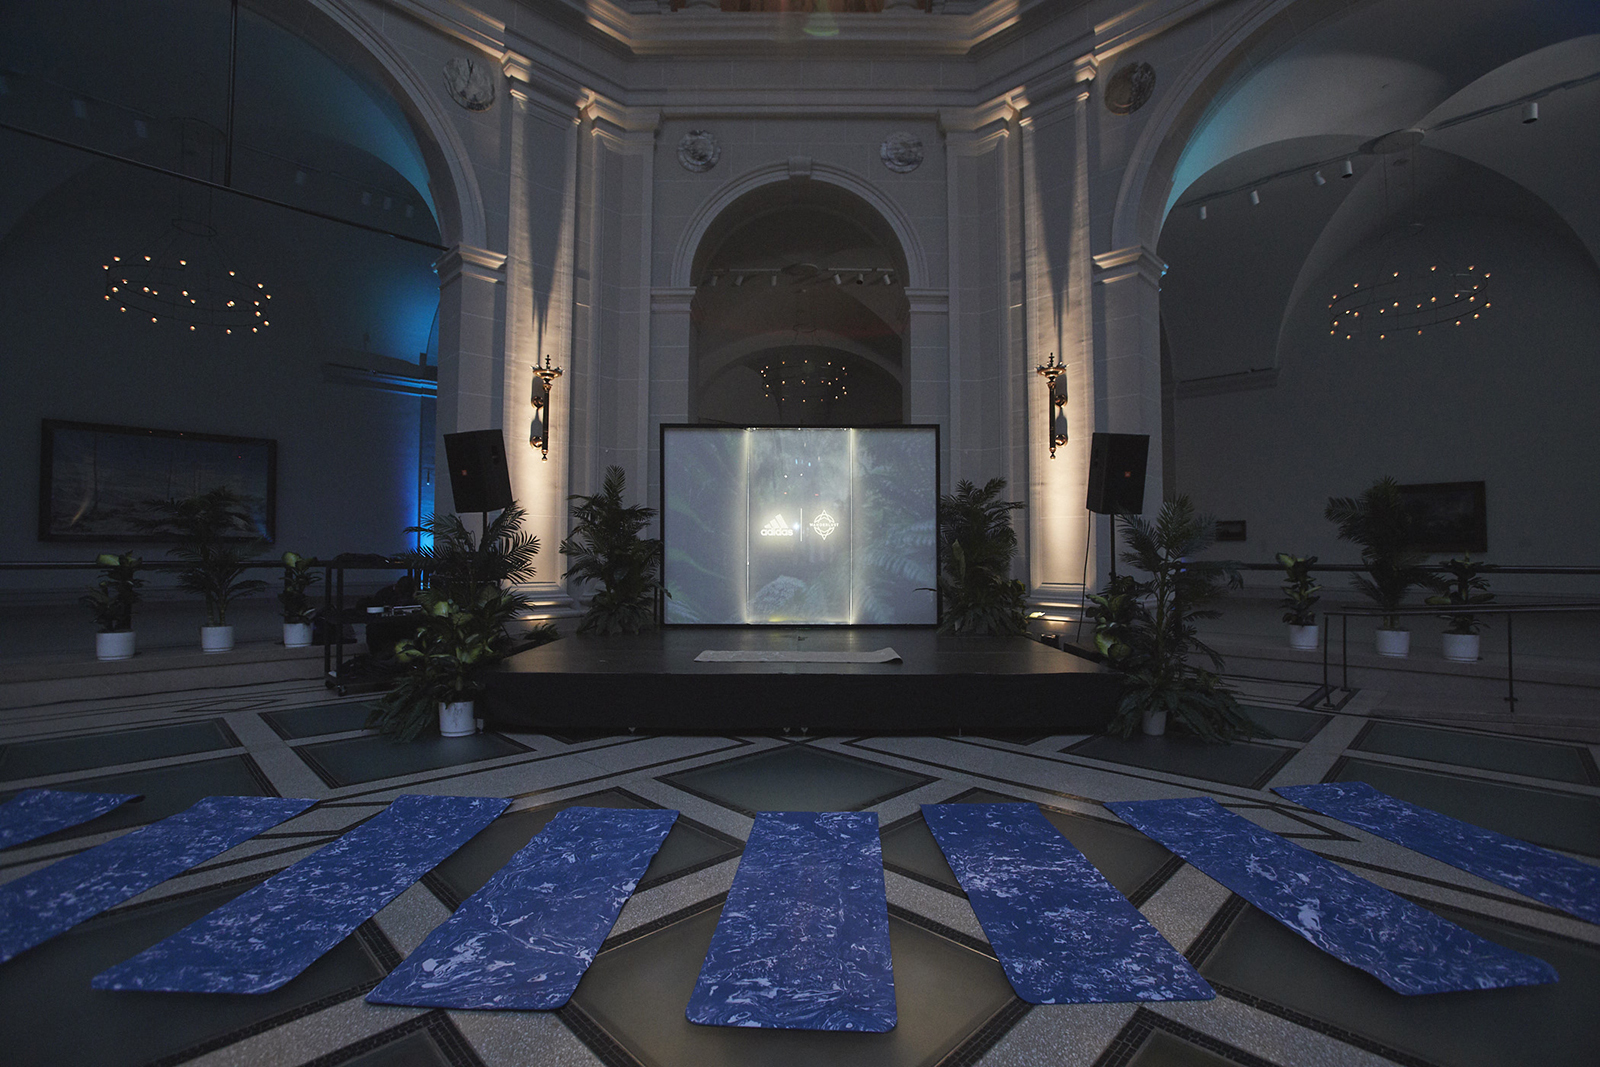 A stage  with a lit screen in a dimly lit atrium, surrounded by plants, is faced by a row of empty yoga mats.